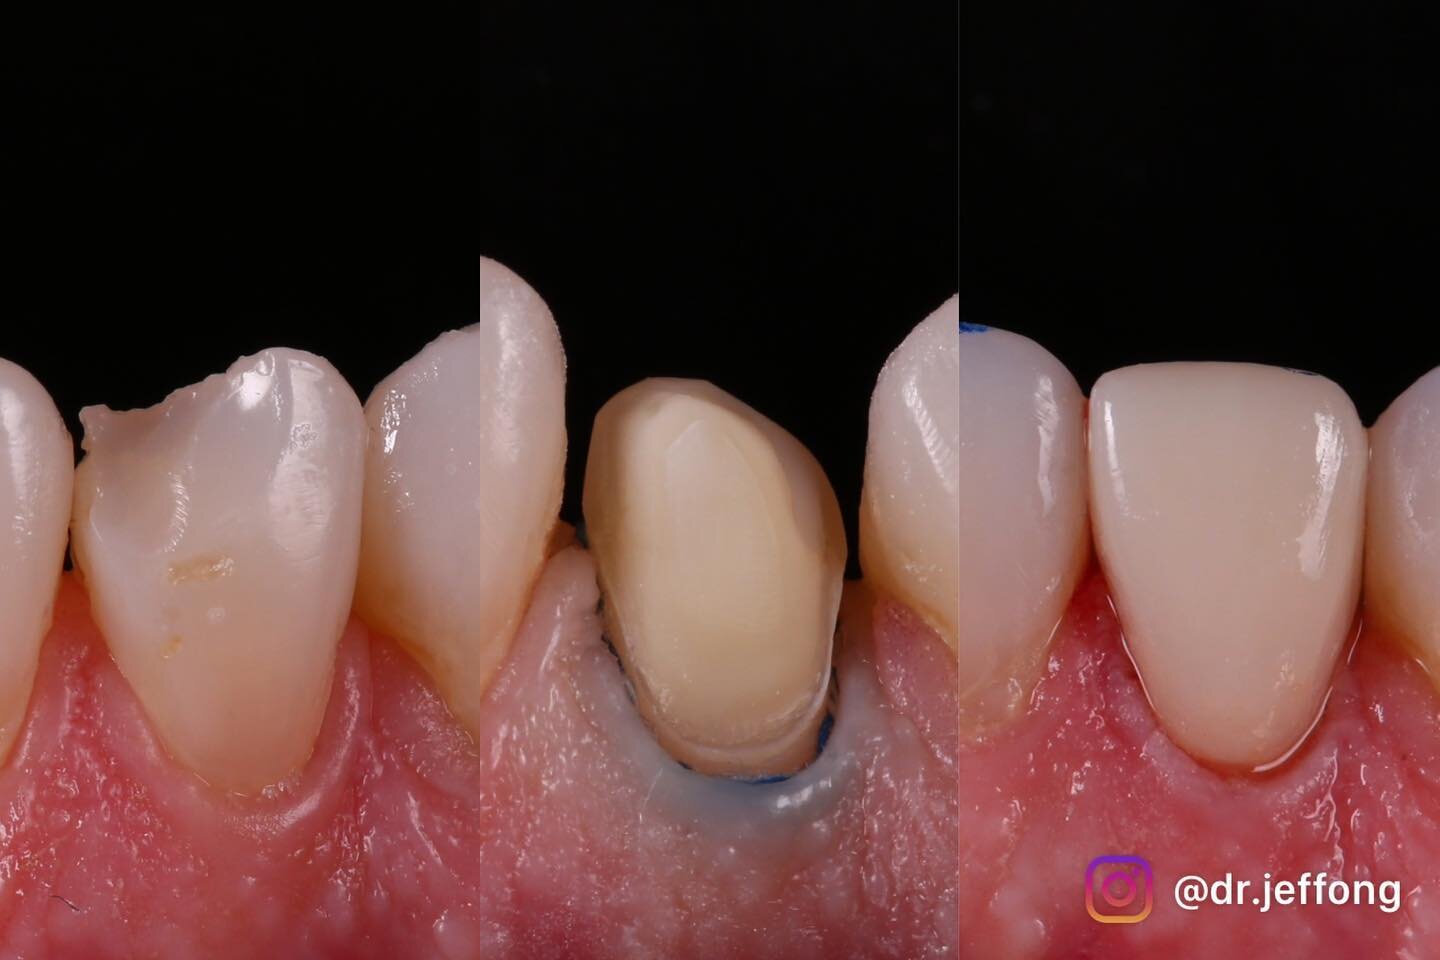 CEREC e.max veneer
Patient previously had a composite veneer which fractured, so we replaced it with ceramic veneer. The shade could be improved, but patient was happy with the outcome